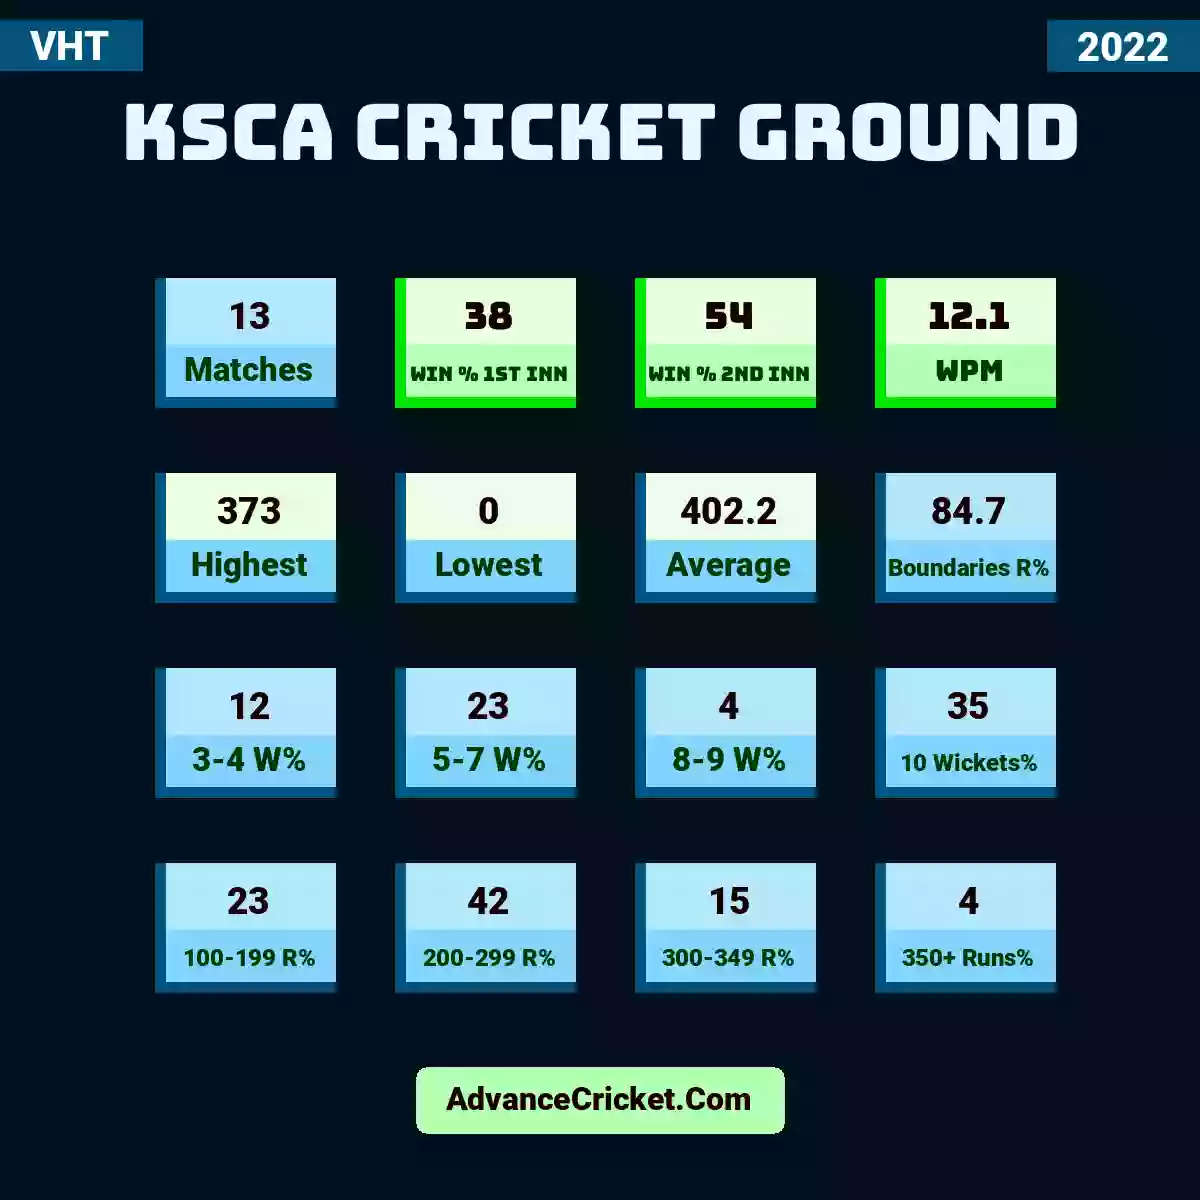 Image showing KSCA Cricket Ground with Matches: 13, Win % 1st Inn: 38, Win % 2nd Inn: 54, WPM: 12.1, Highest: 373, Lowest: 0, Average: 402.2, Boundaries R%: 84.7, 3-4 W%: 12, 5-7 W%: 23, 8-9 W%: 4, 10 Wickets%: 35, 100-199 R%: 23, 200-299 R%: 42, 300-349 R%: 15, 350+ Runs%: 4.